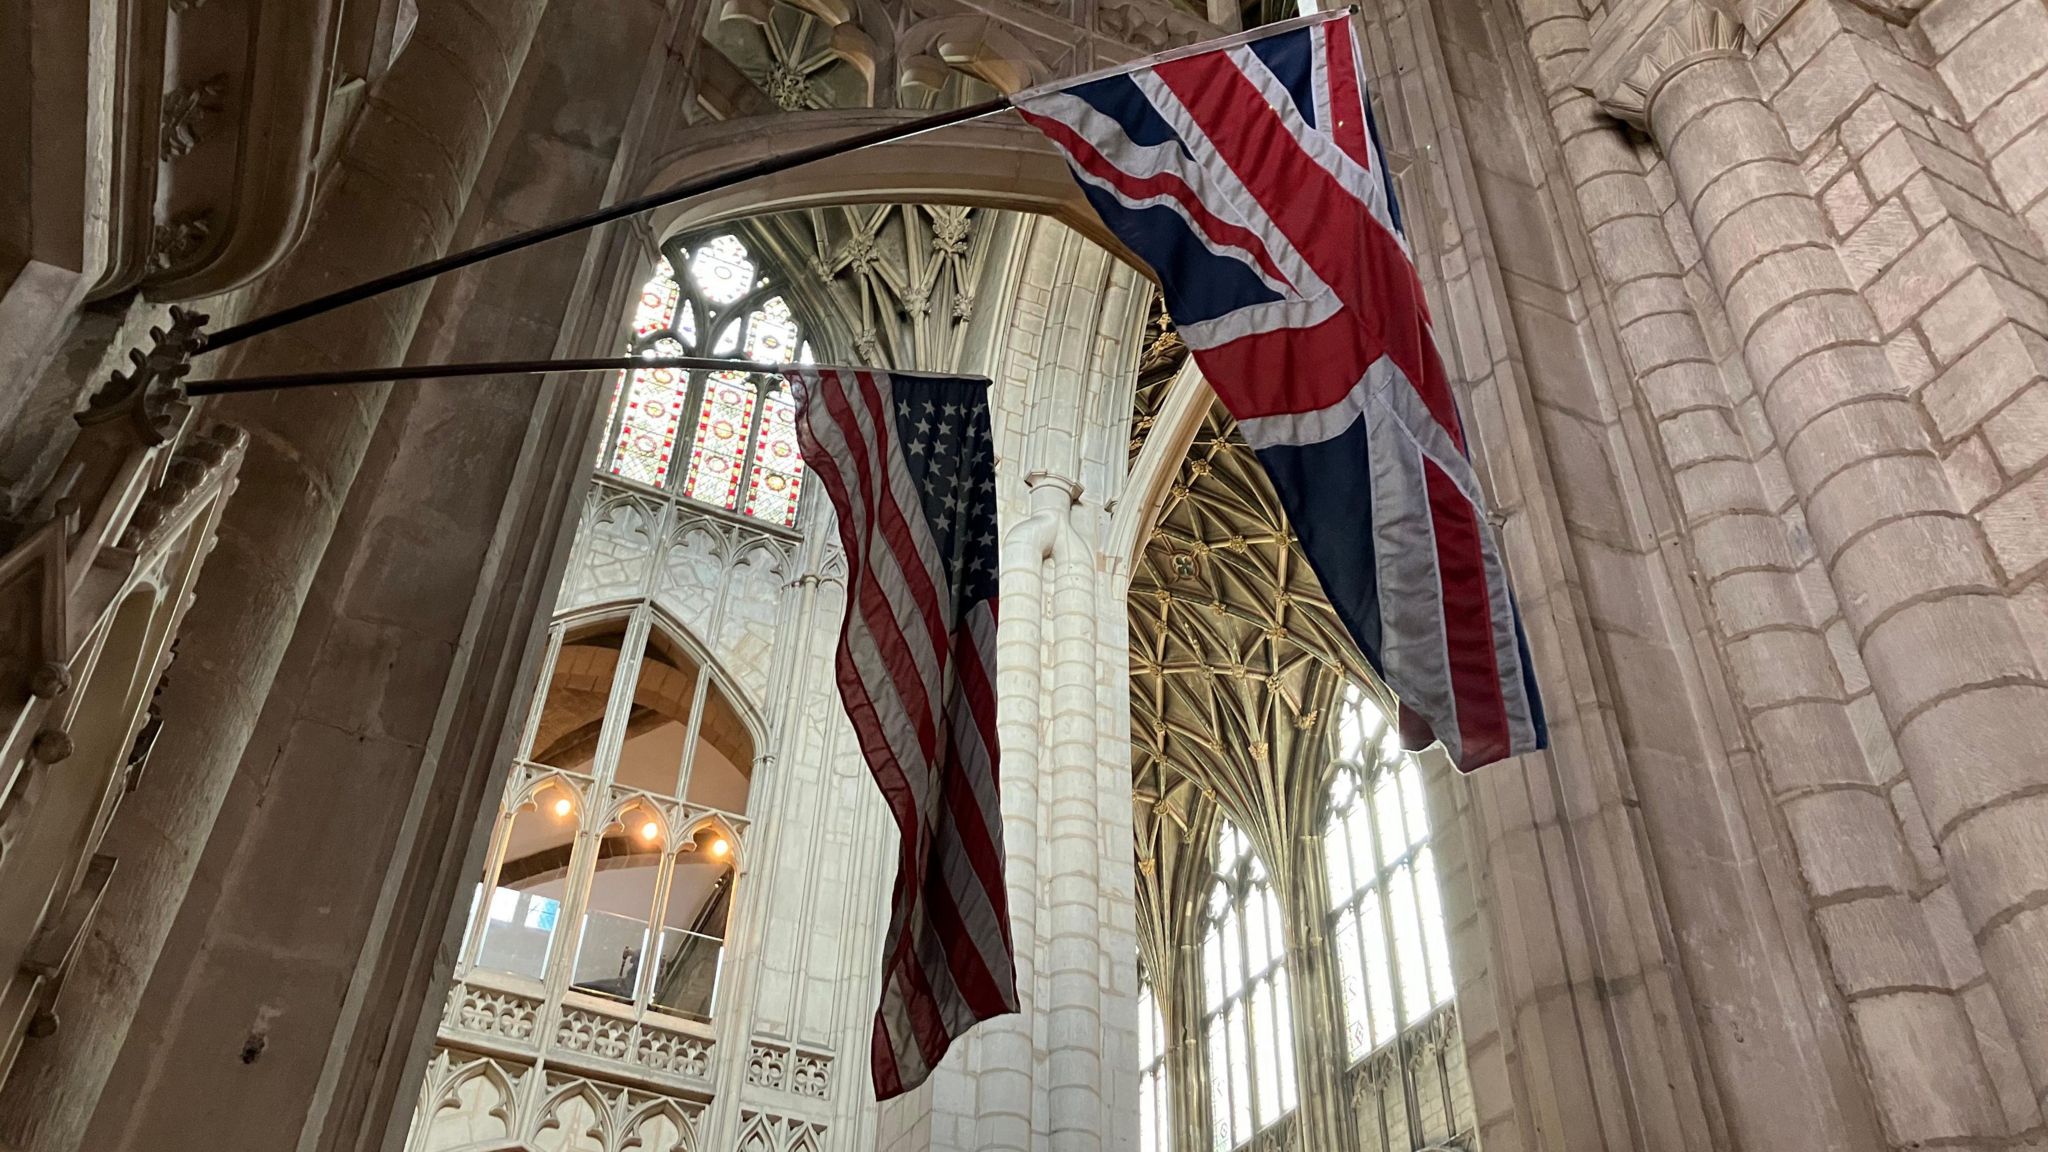 A British flag and US flag hanging beside each other in Gloucester Cathedral